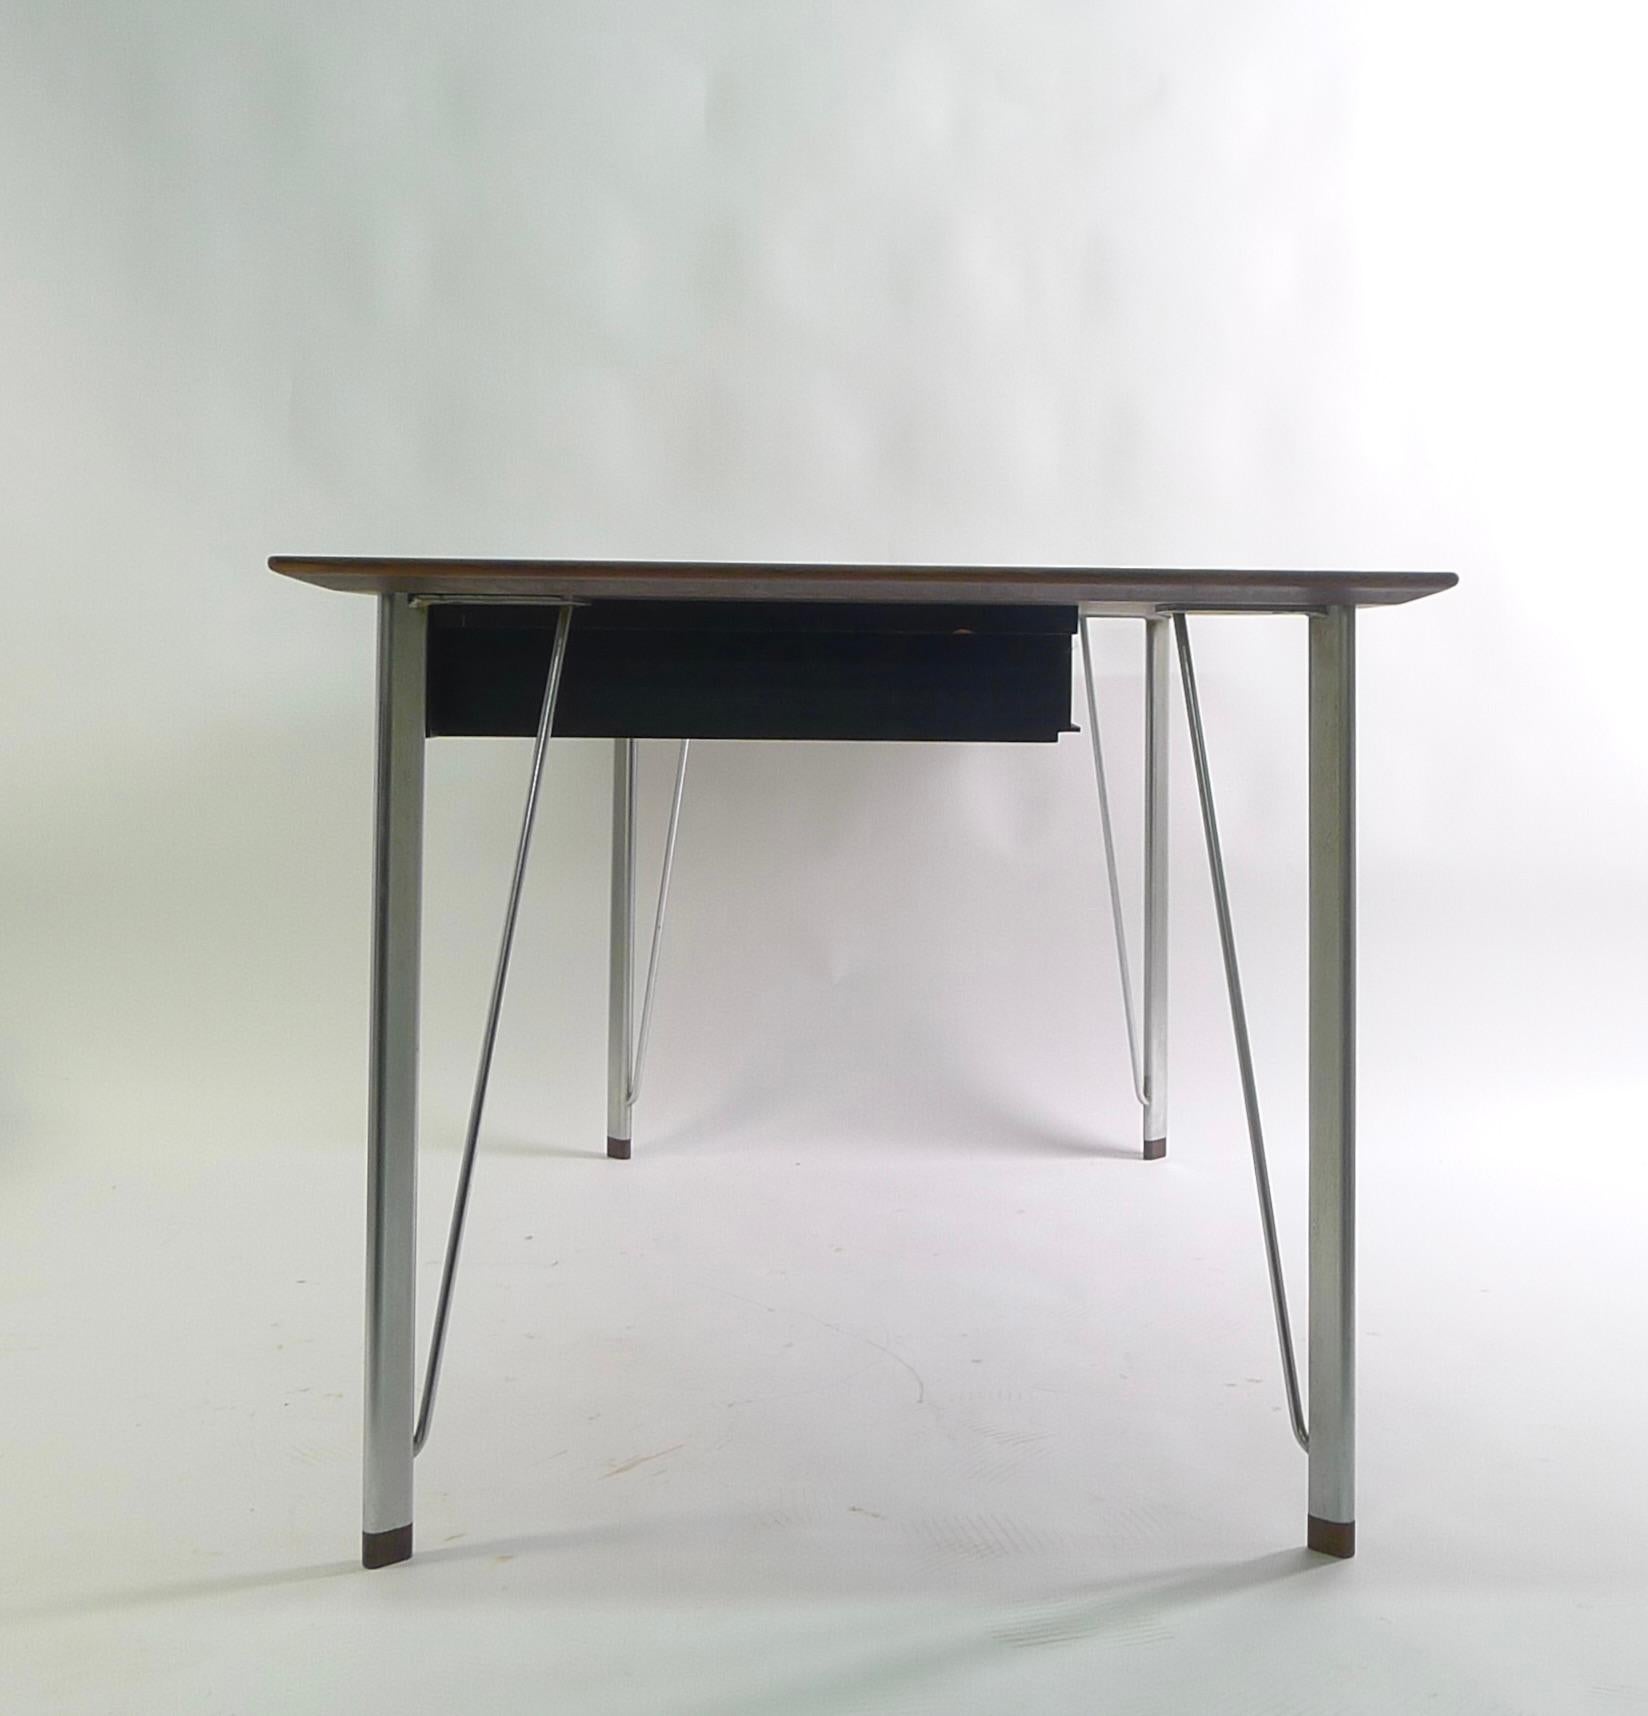 Mid-20th Century Arne Jacobsen Rosewood and Steel Writing Desk FH3605, Danish, Designed 1955 For Sale